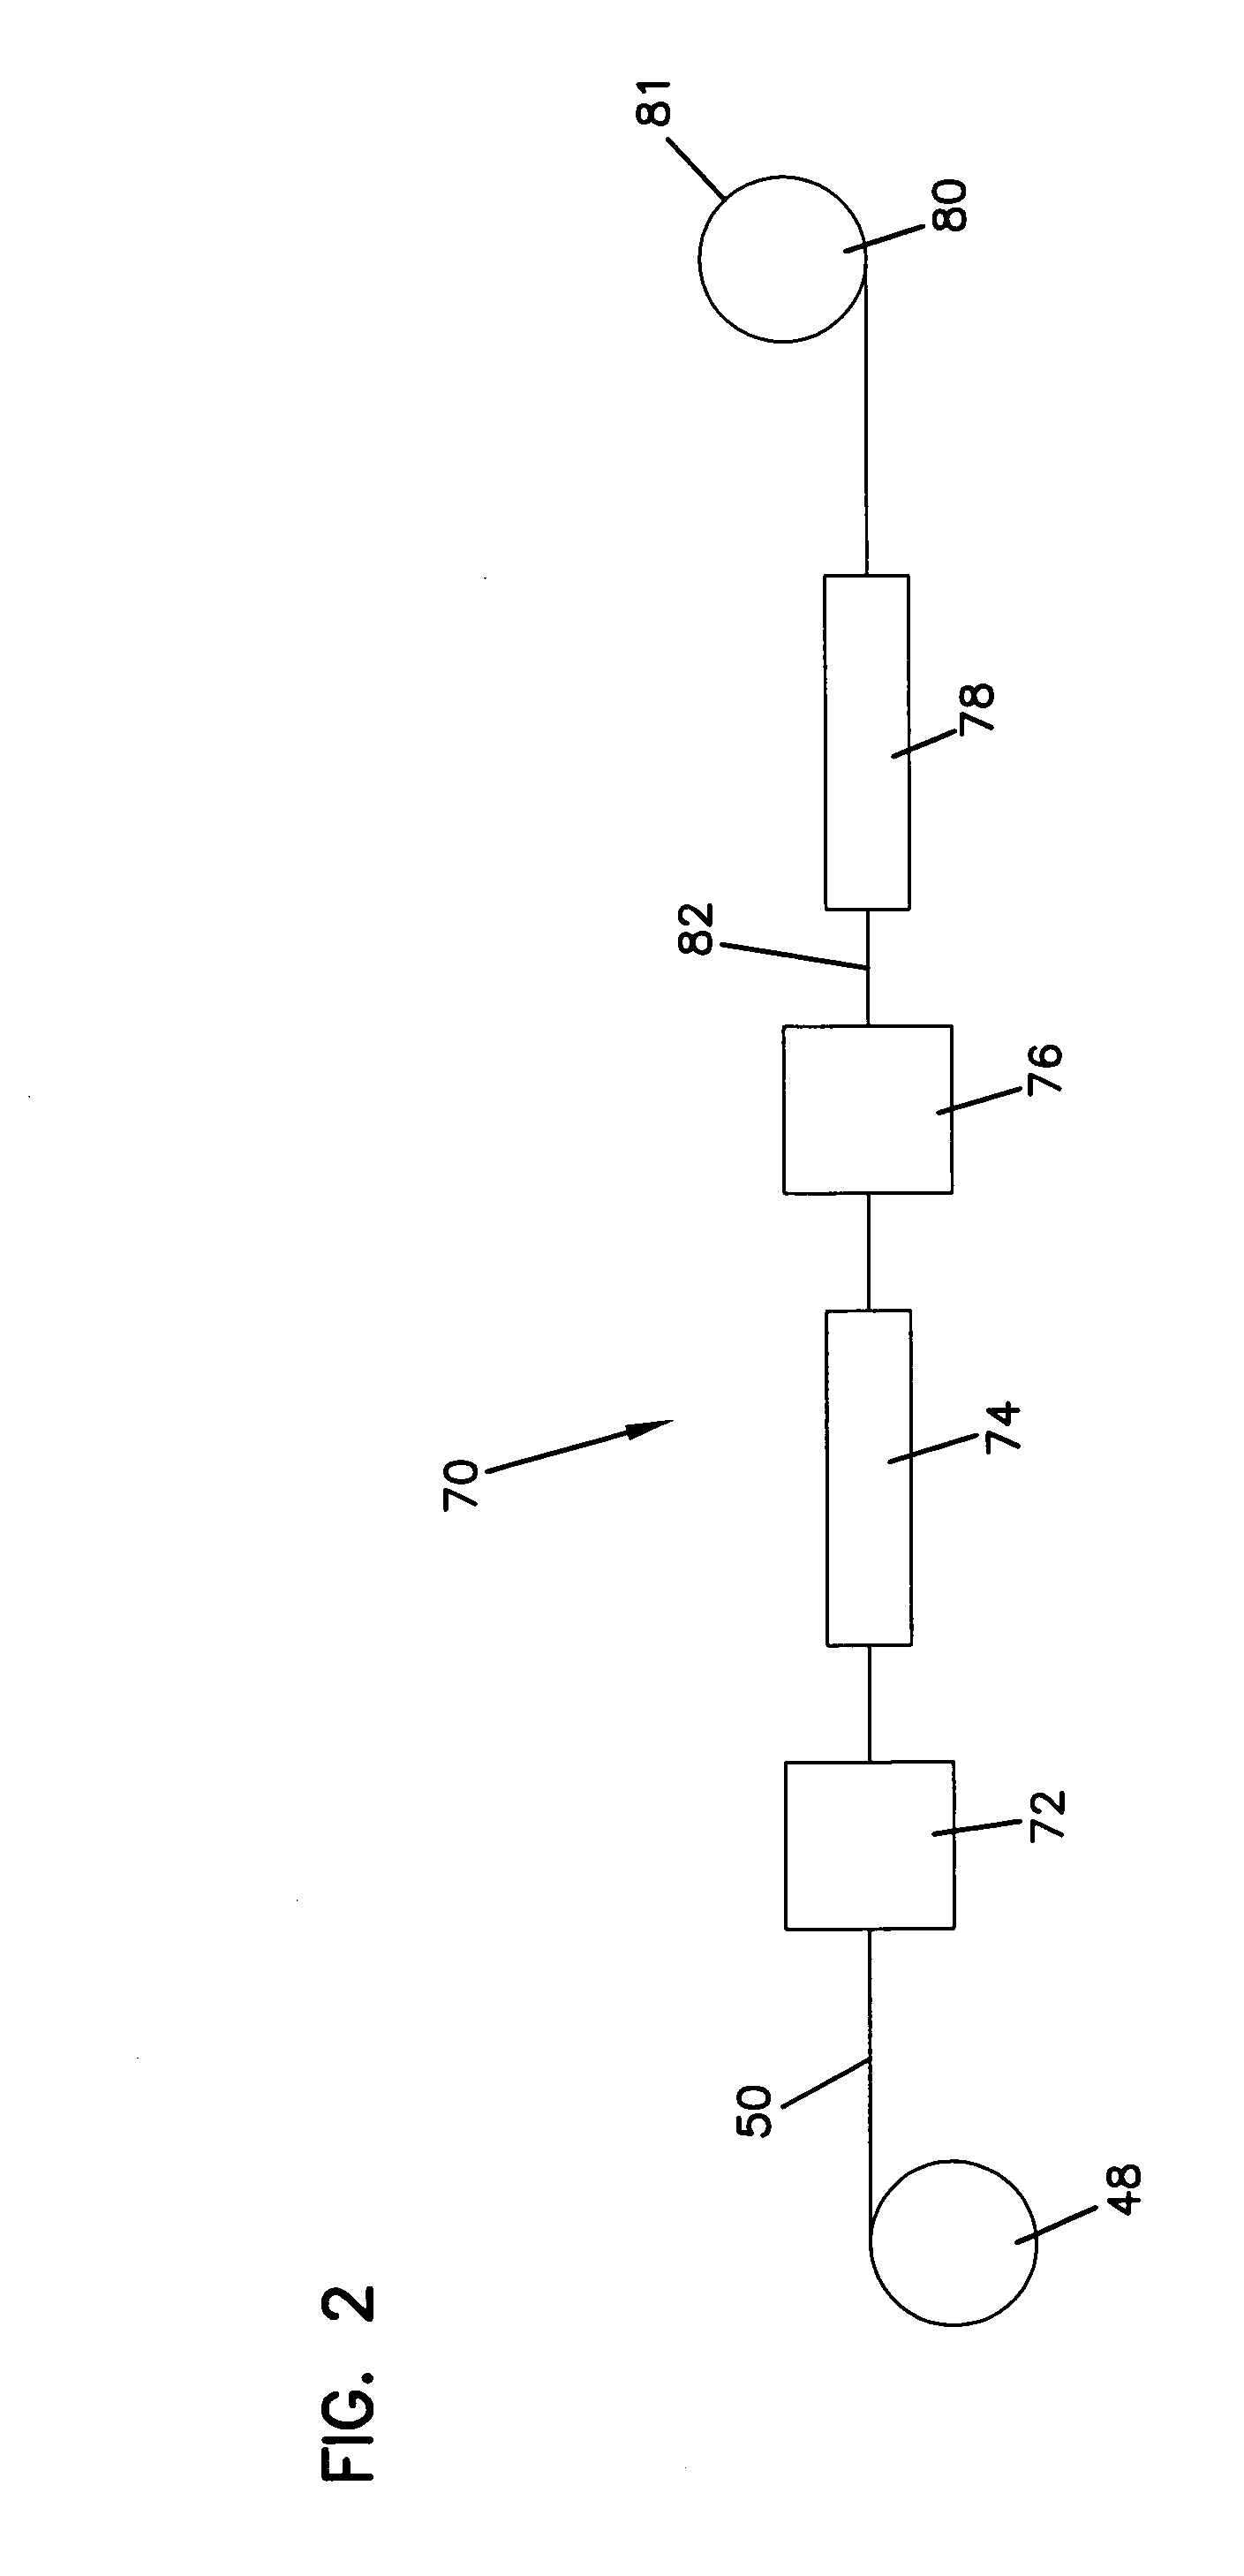 Creped paper product and method for manufacturing